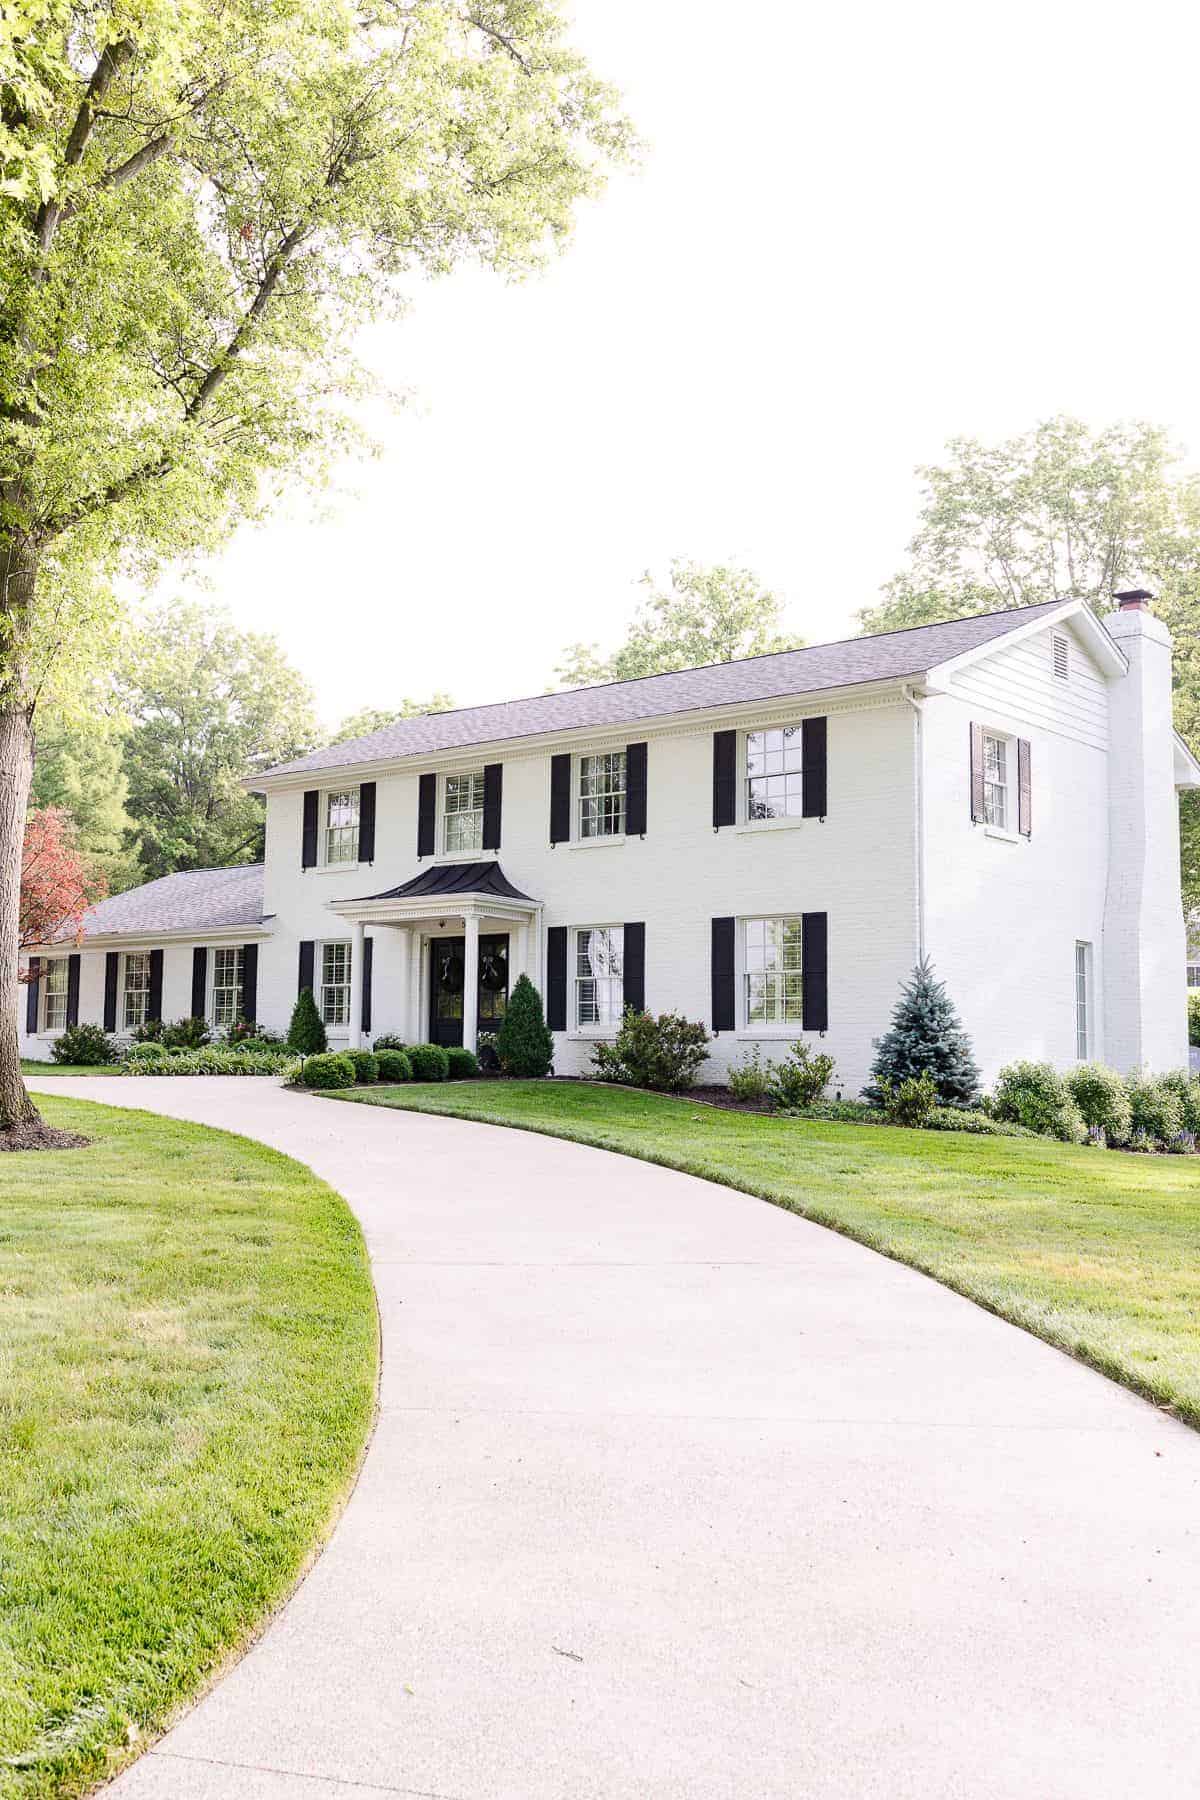 A colonial white brick house with a curved driveway.